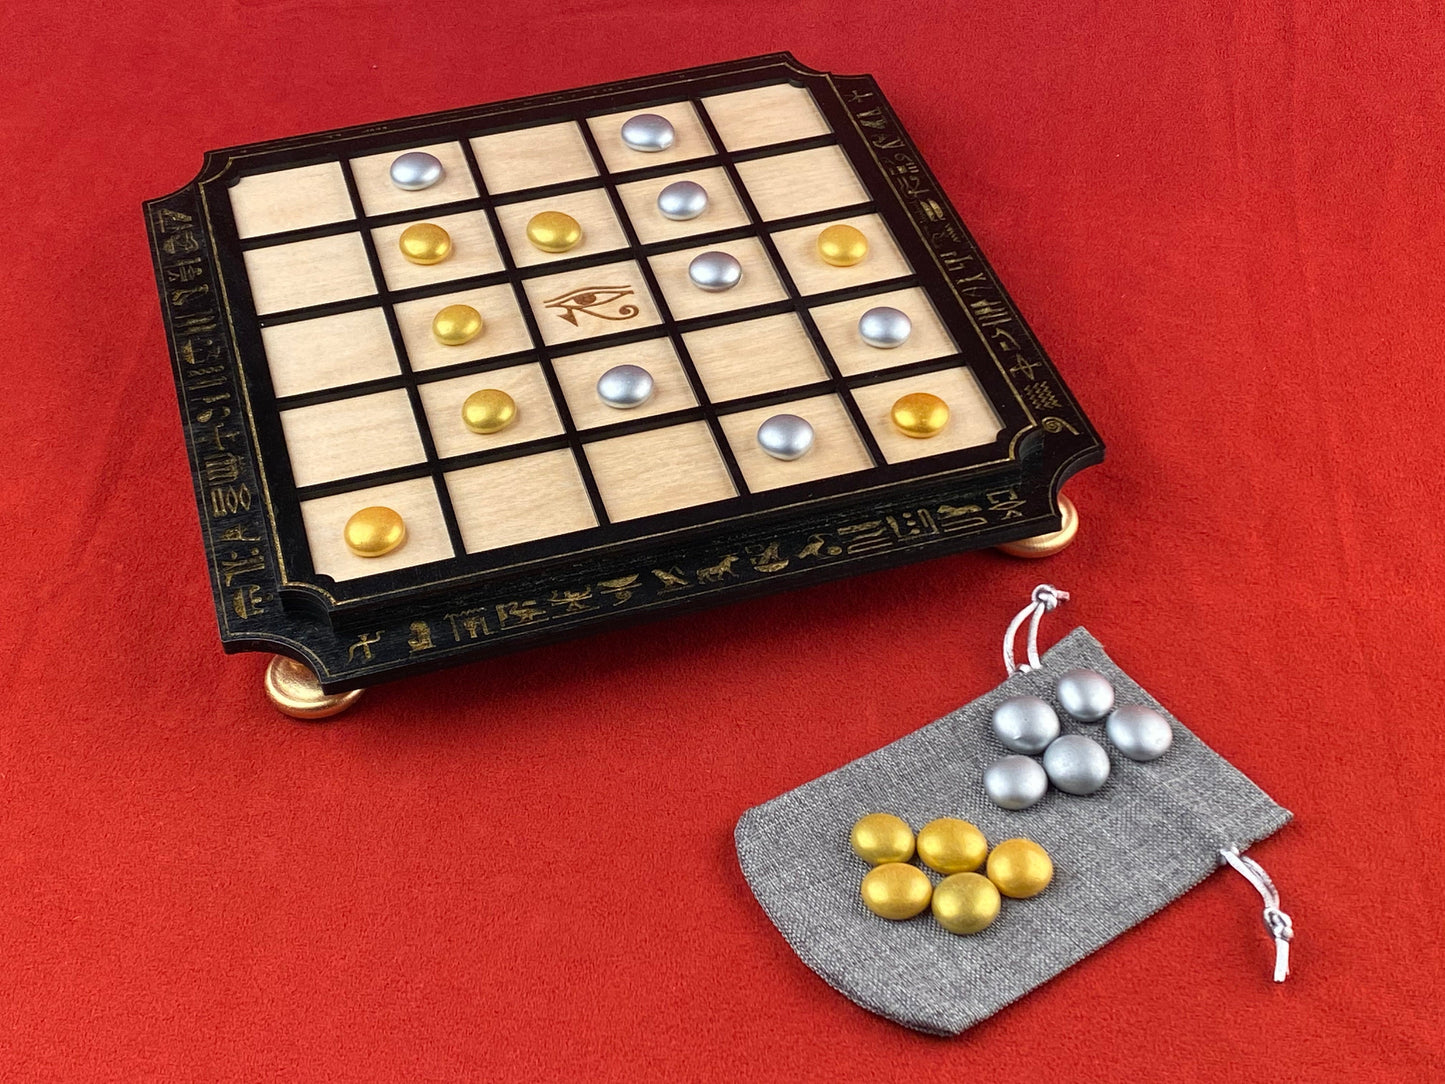 Seega! A Game from Ancient Egypt. The Strategic game from the New Kingdom.